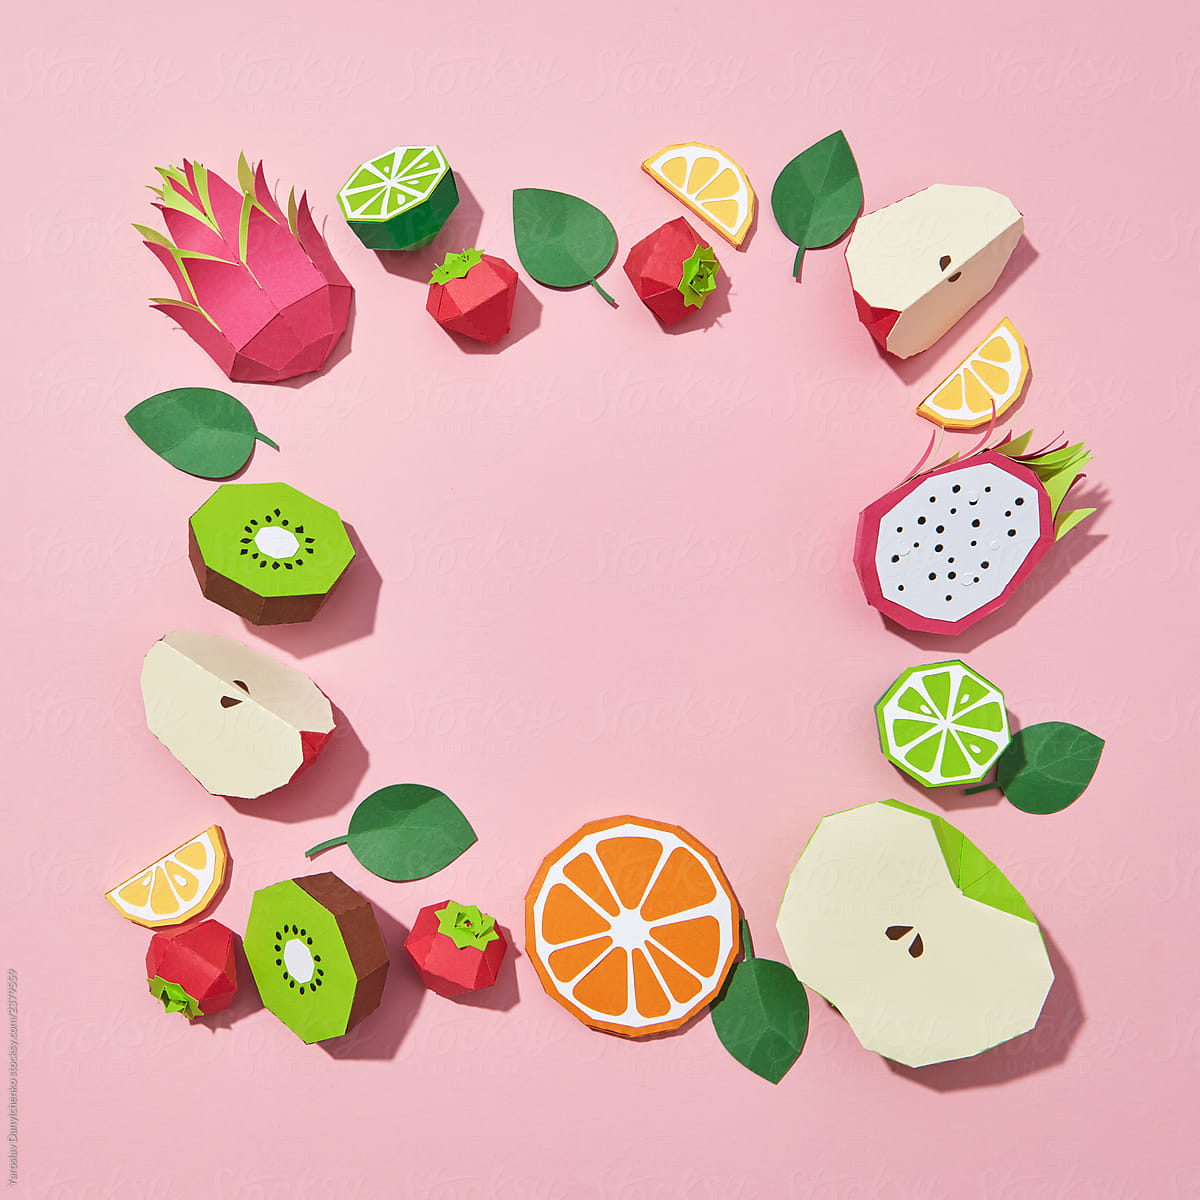 Fruit composition in the form of a frame of paper handcraft halv